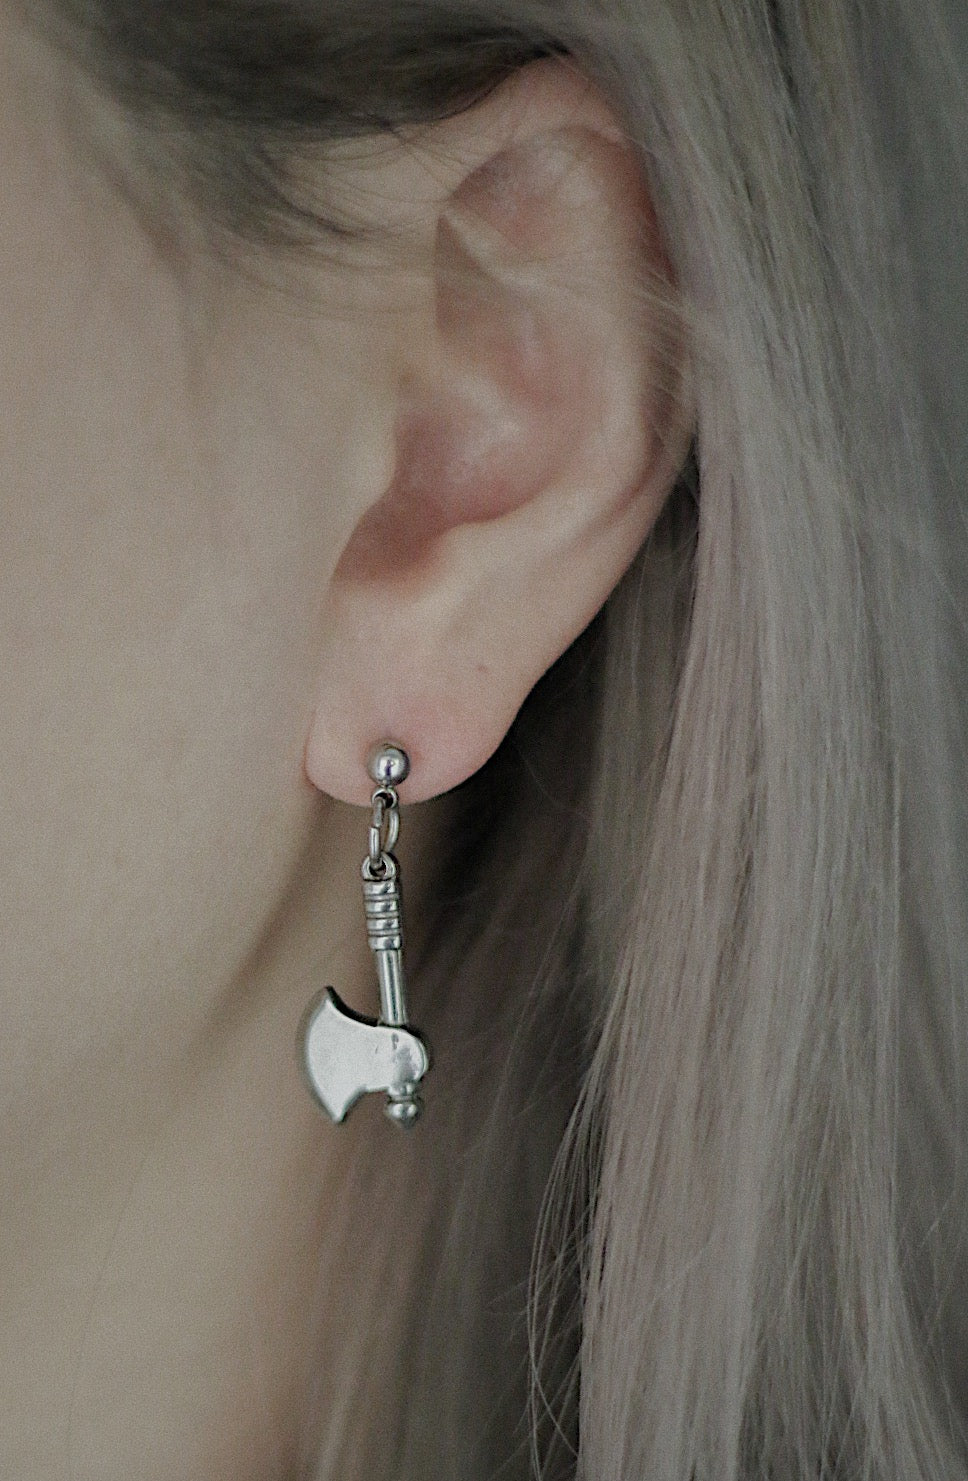 Monora Gothic *Mr.axe* Stud Earring